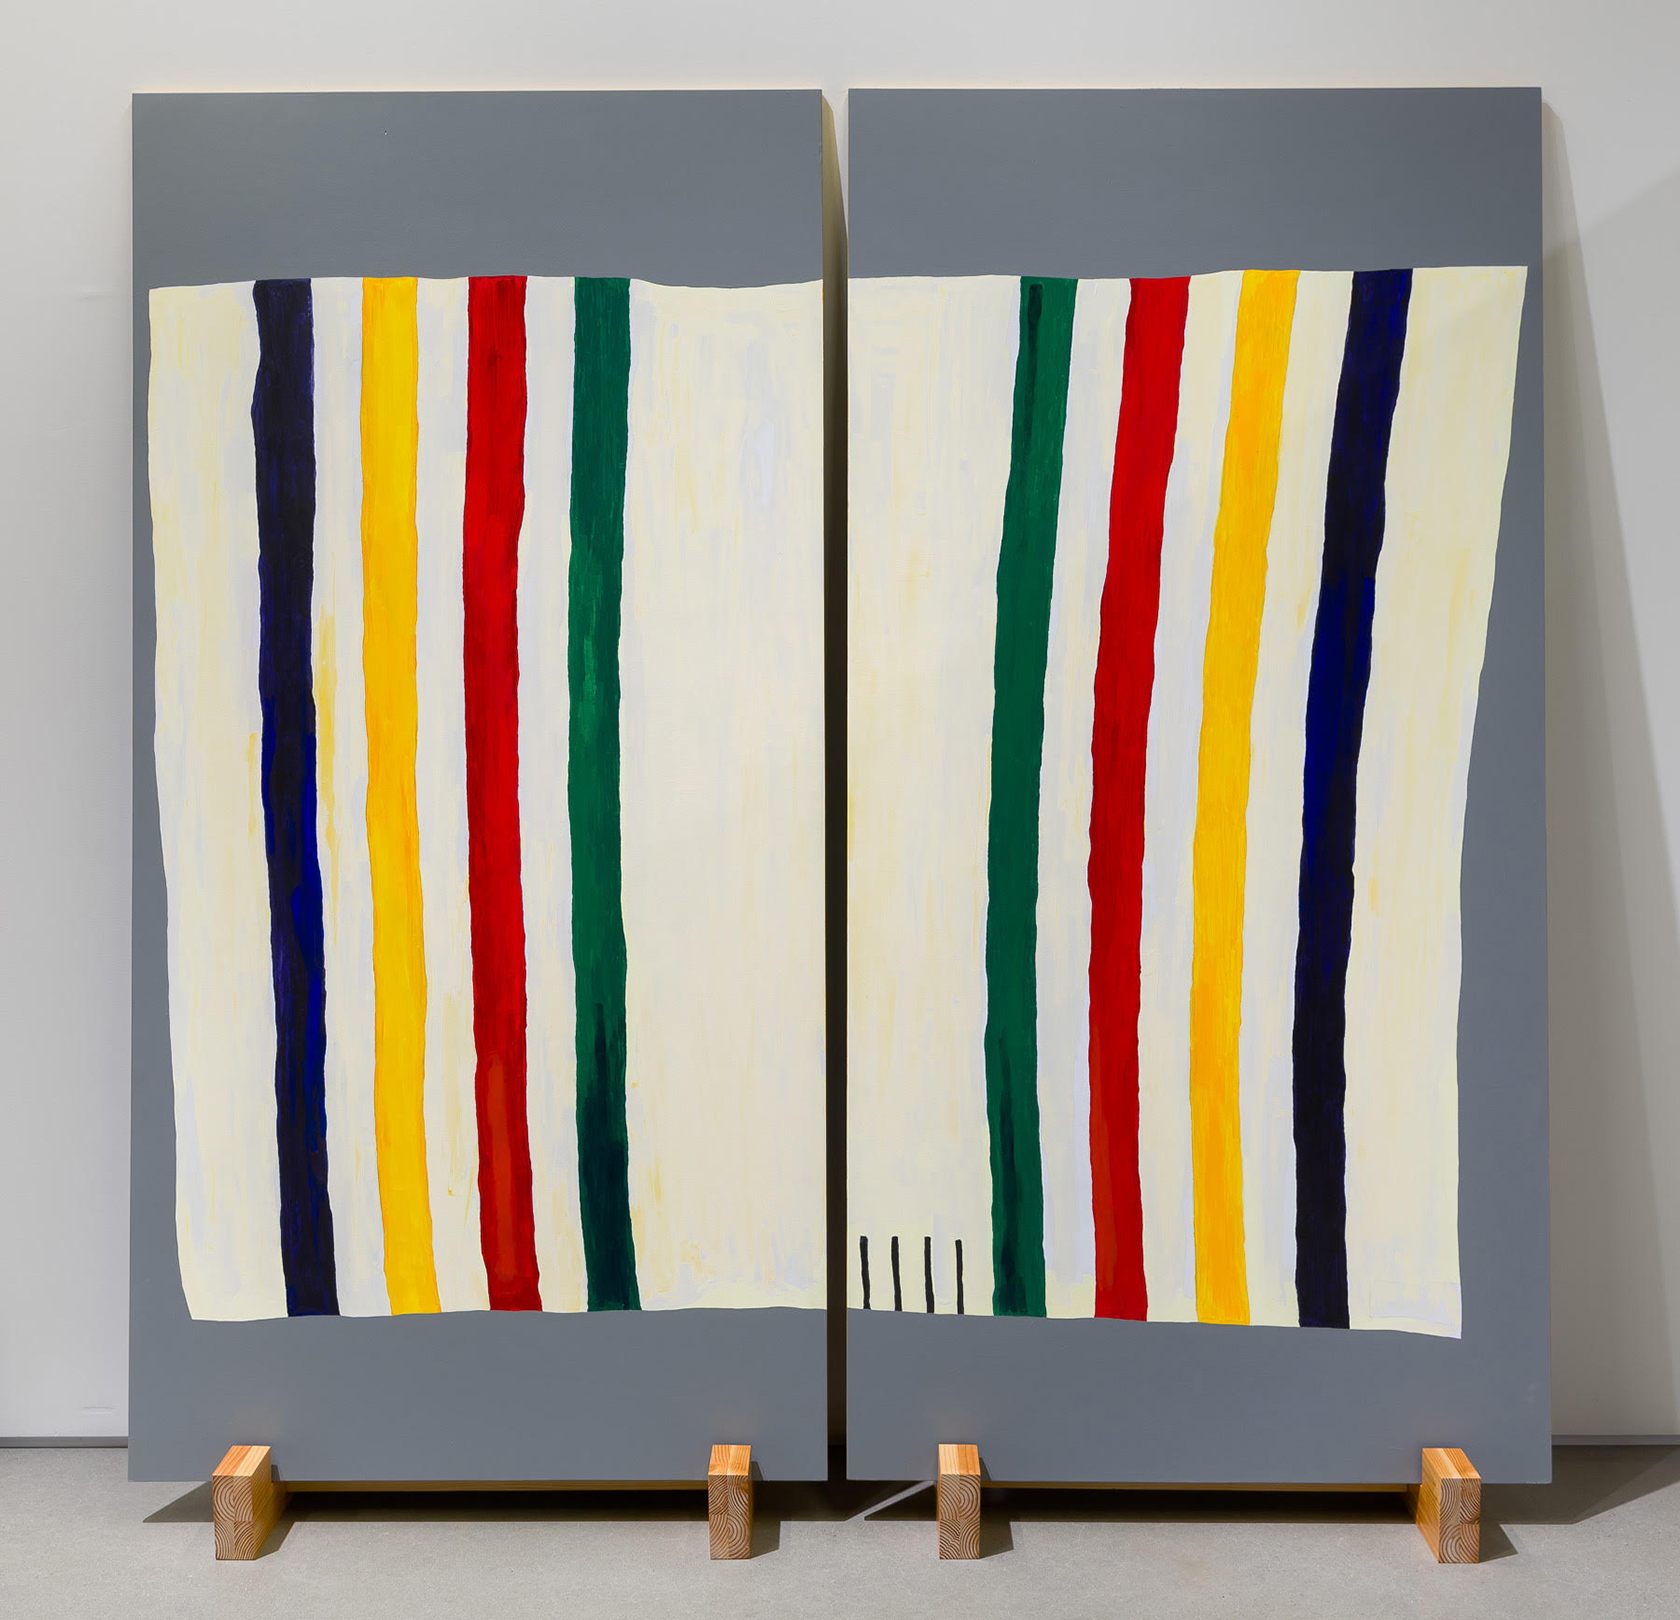 Two tall panels painted with gray horizontal stripes at top and bottom and white, blue, yellow, red, and green vertical stripes in the center